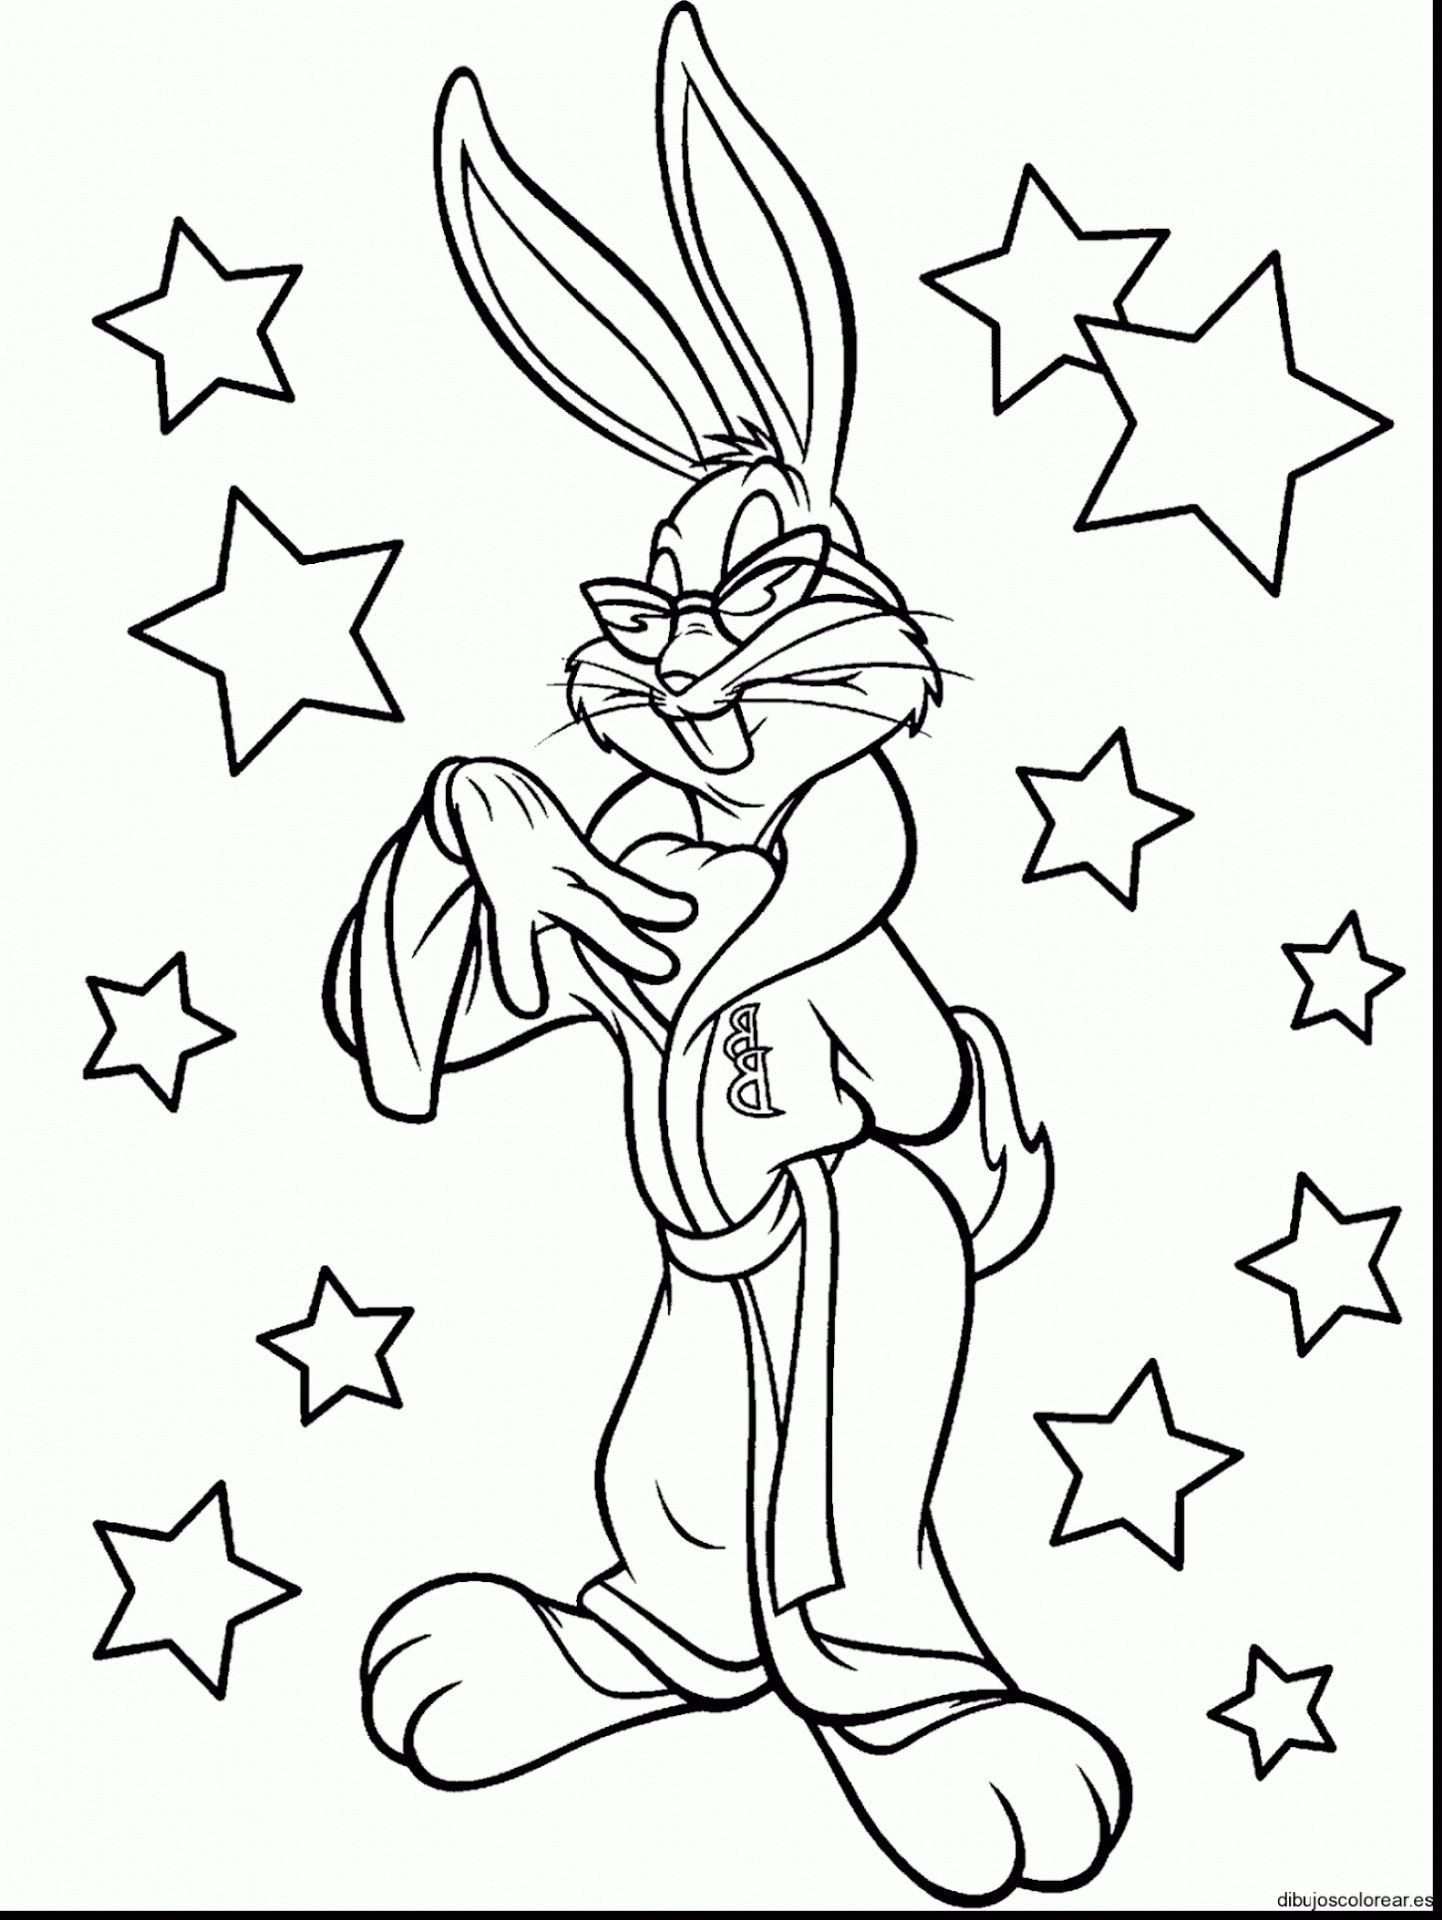 Download Looney Tunes Coloring Pages - Learny Kids